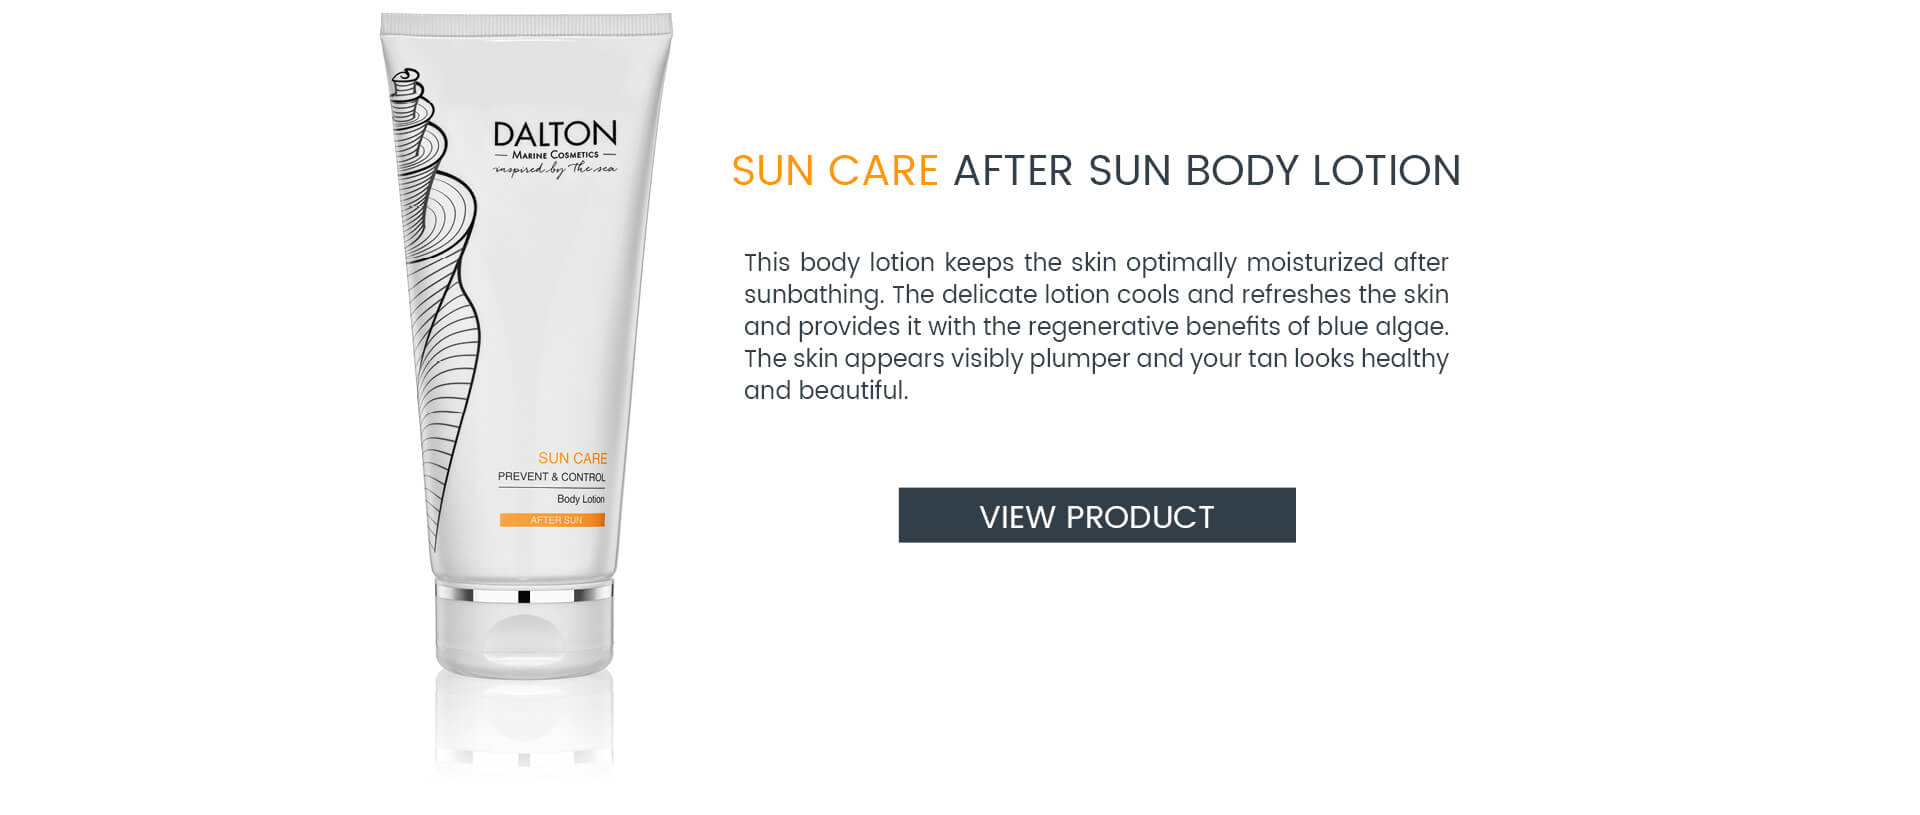 After Sun Body Lotion